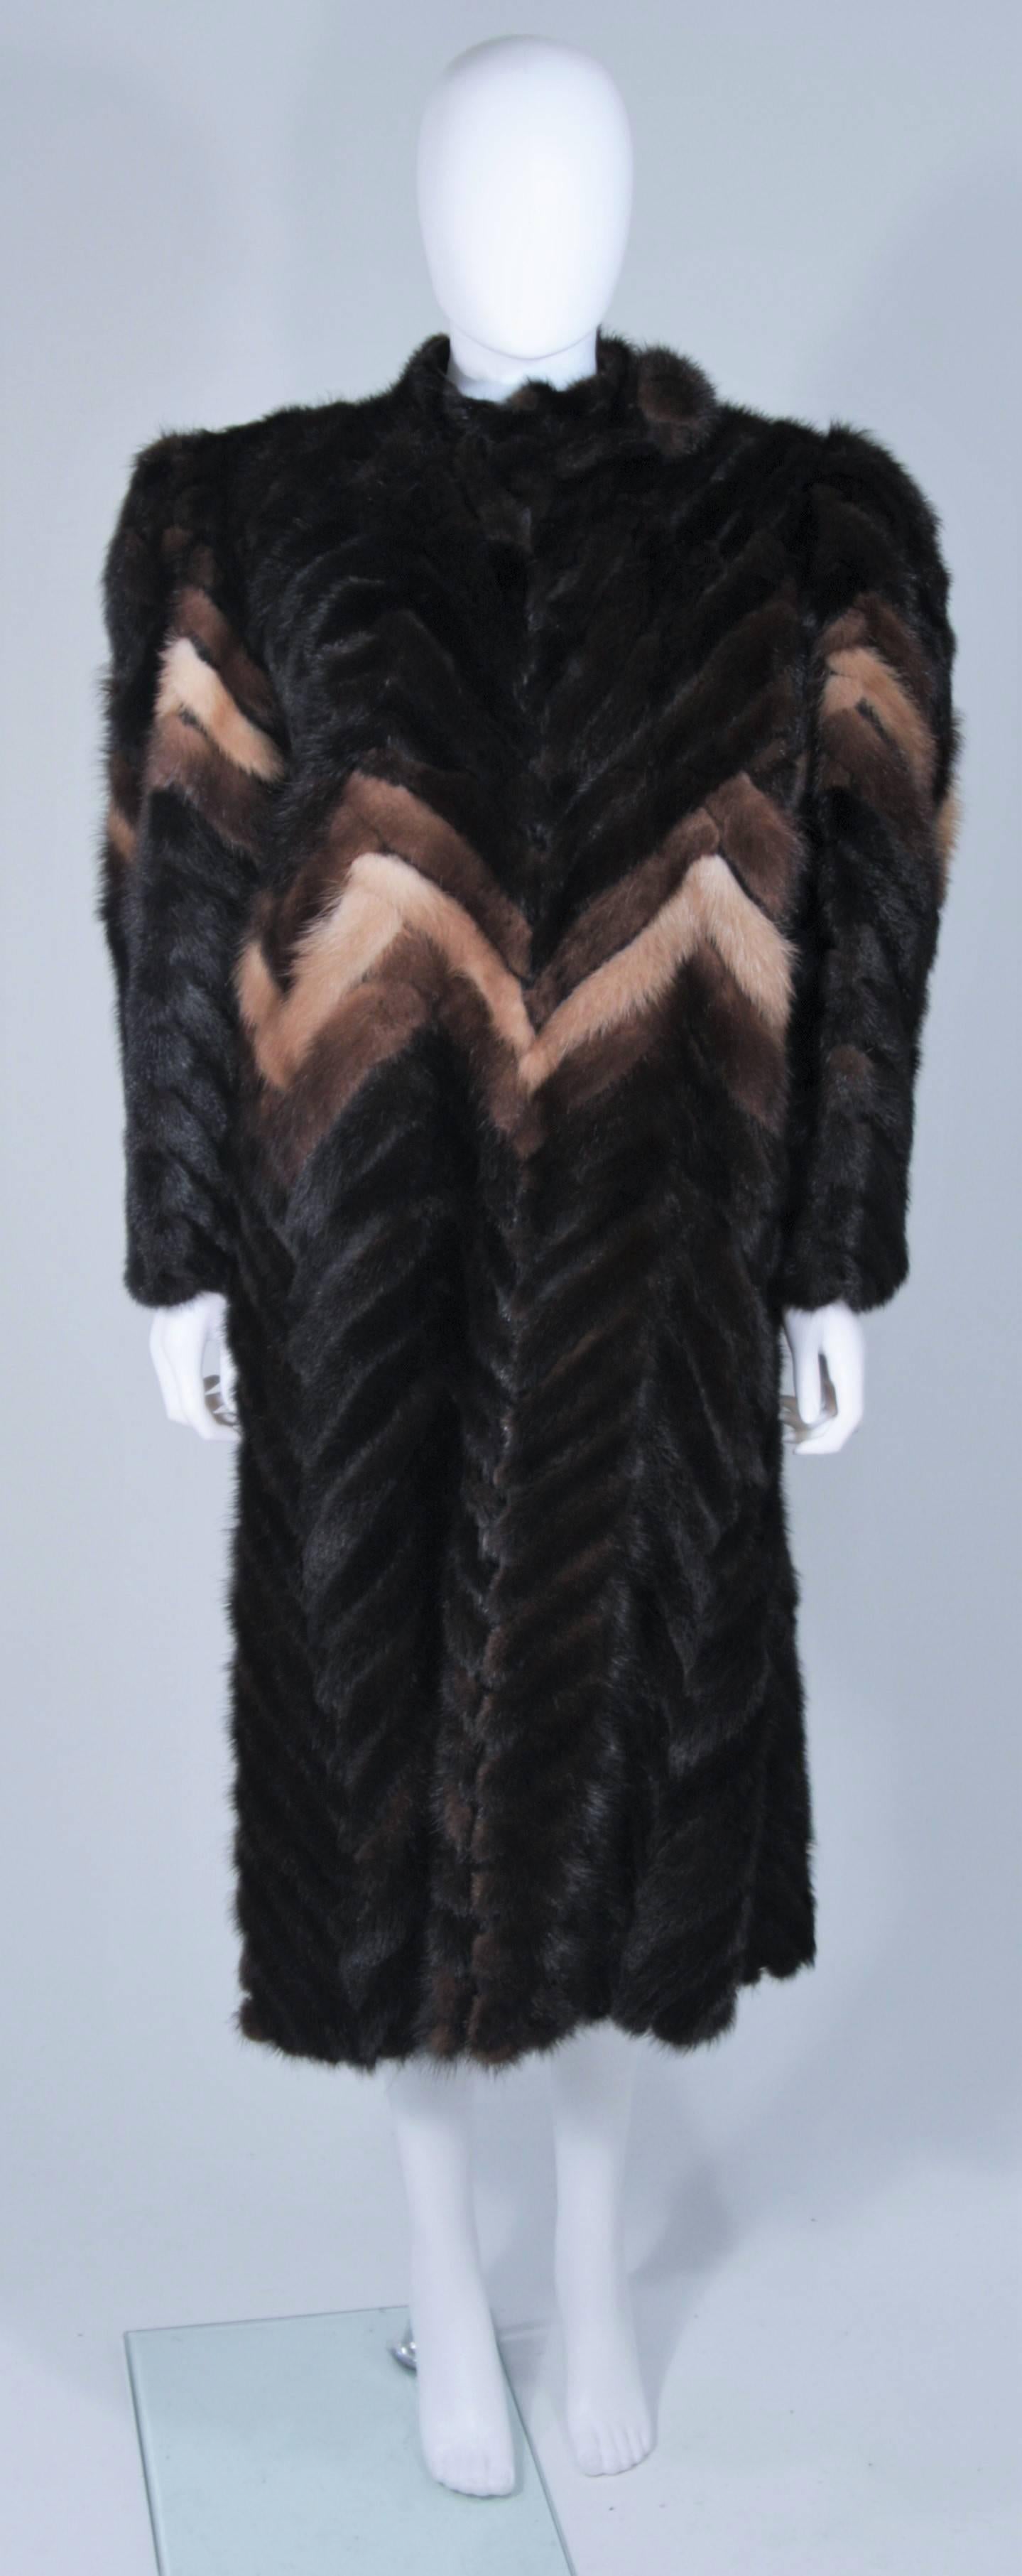  This Ted Lapidus Couture coat is composed of mink in hues of natural browns with a chevron pattern. There is a center front top large closure and hook & eyes throughout. There are side pockets. In excellent vintage condition, monogrammed with